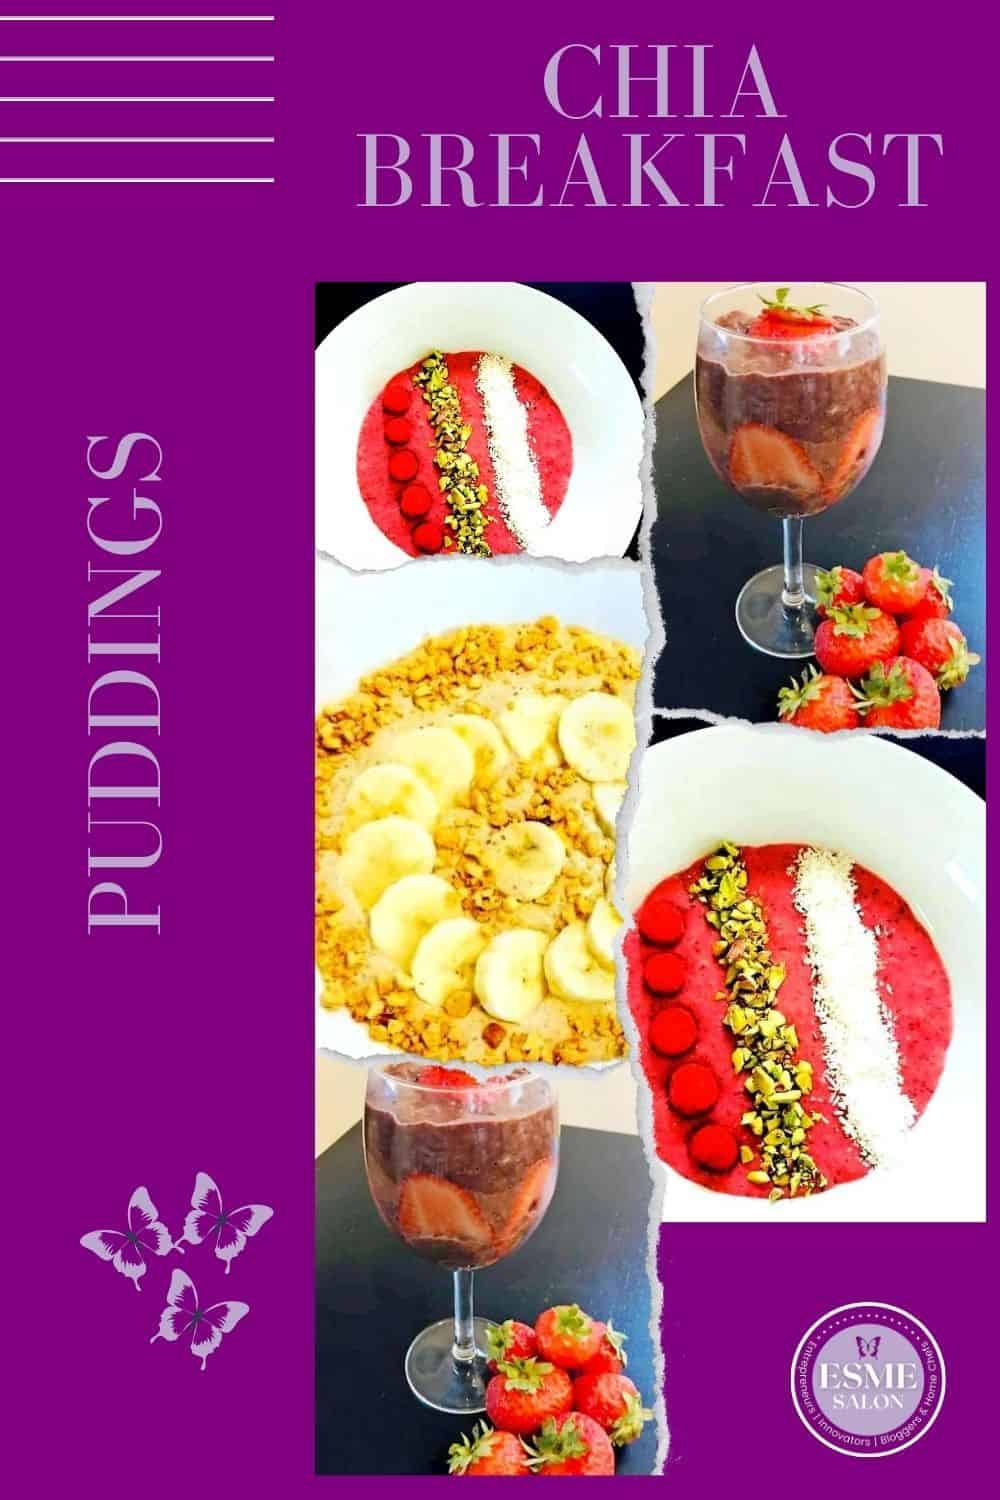 3 bowls Chia Breakfast Puddings, one with strawberries, one with banana and one with pepitas and raspberries